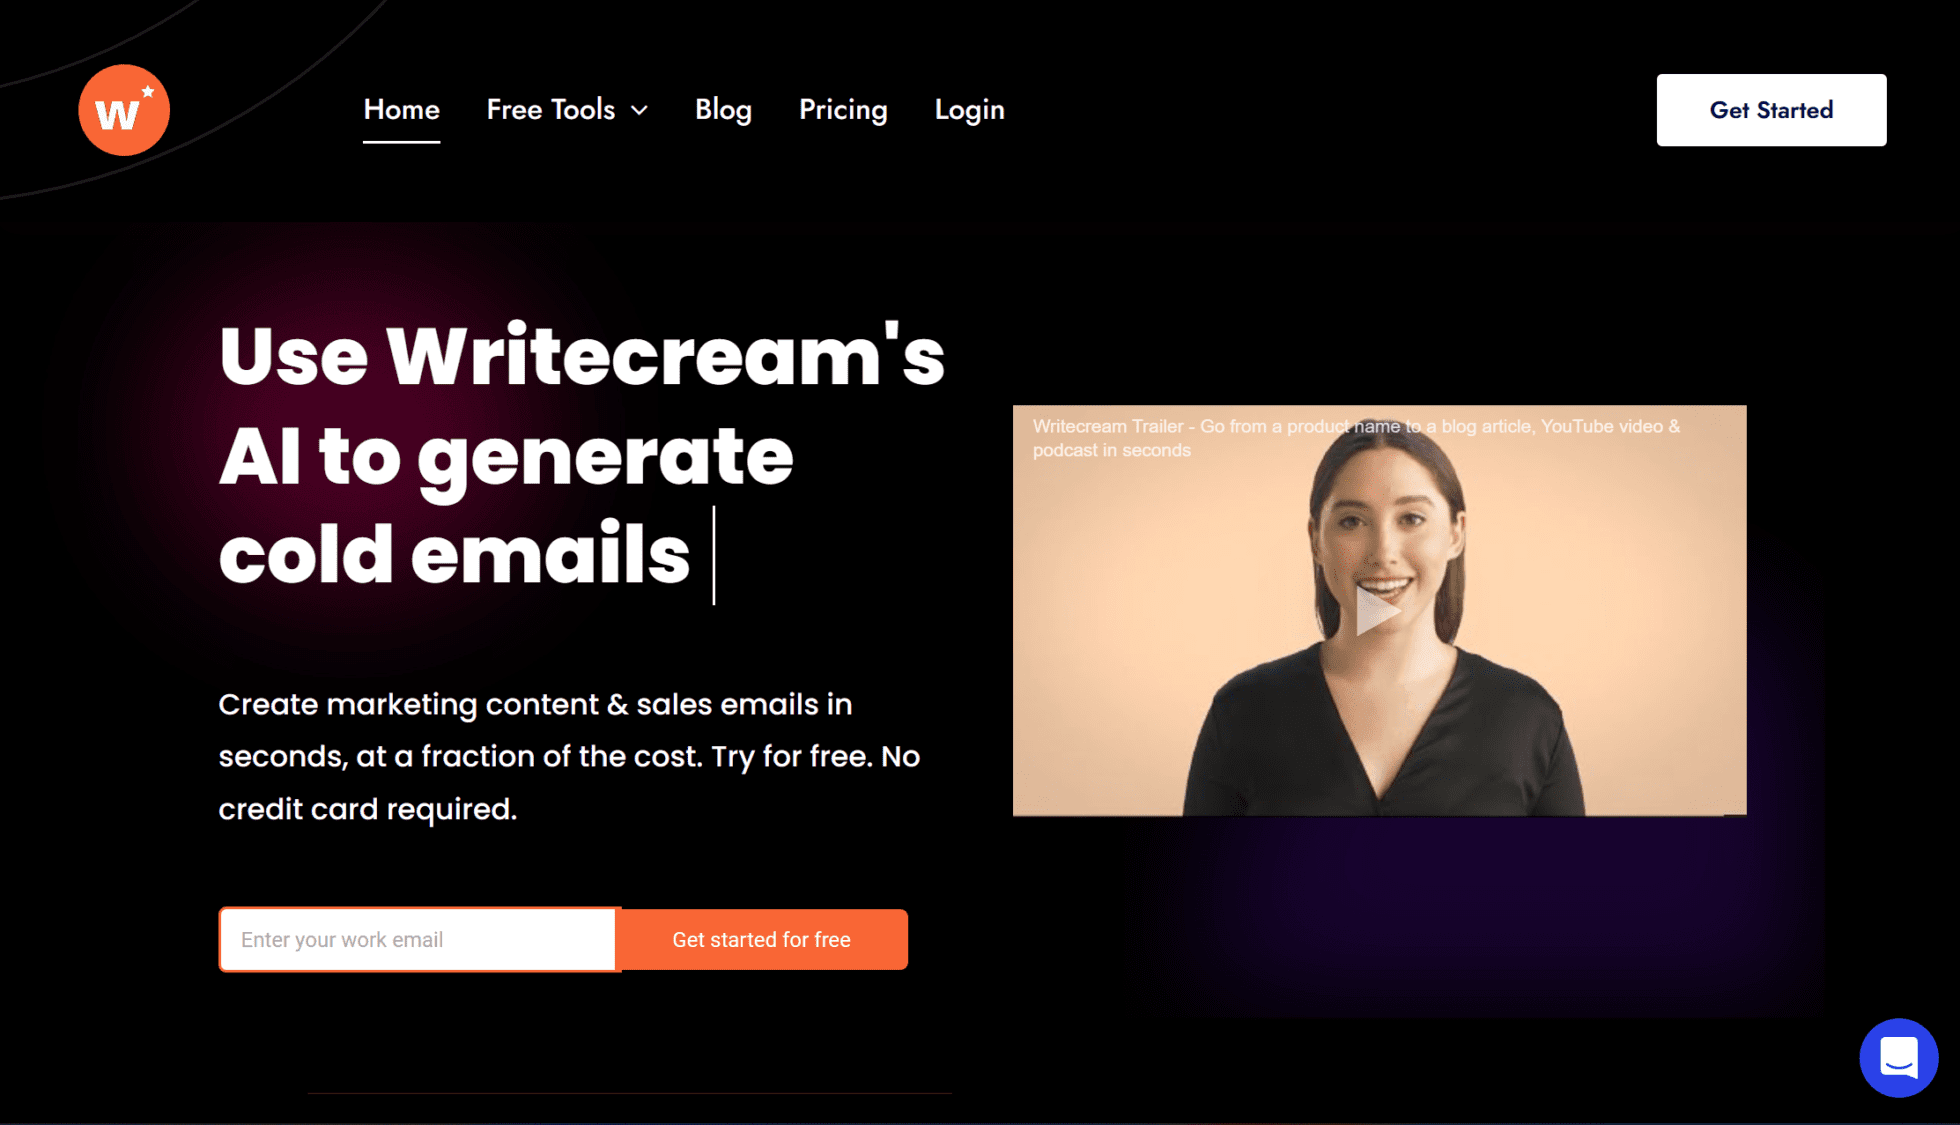 Writecream's AI generates cold emails for you